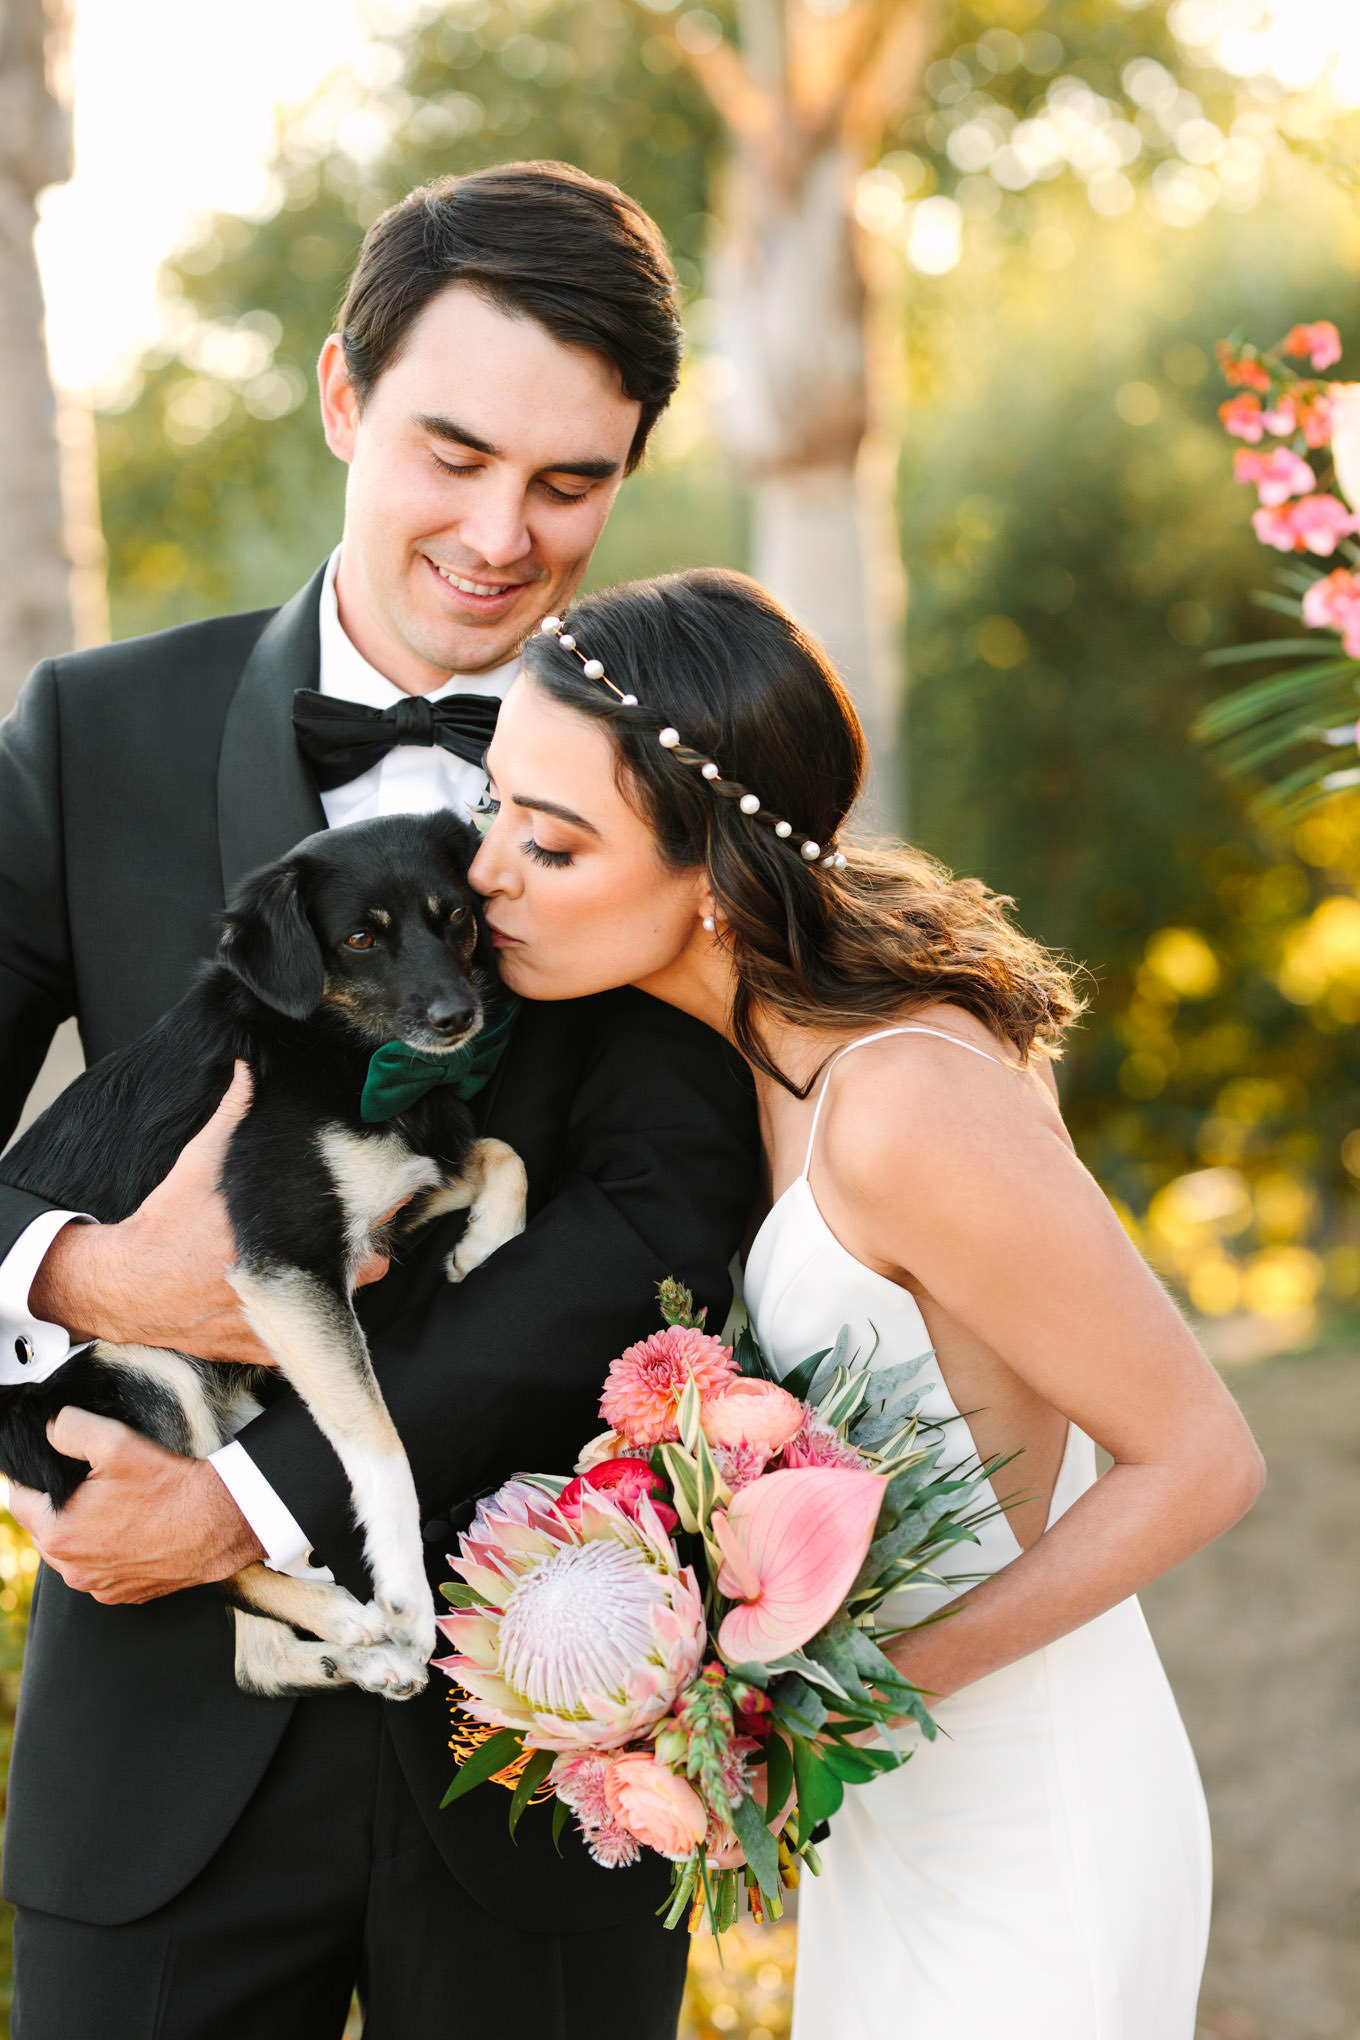 Bride kissing her dog at Malibu micro wedding | Engagement, elopement, and wedding photography roundup of Mary Costa’s favorite images from 2020 | Colorful and elevated photography for fun-loving couples in Southern California | #2020wedding #elopement #weddingphoto #weddingphotography #microwedding   Source: Mary Costa Photography | Los Angeles